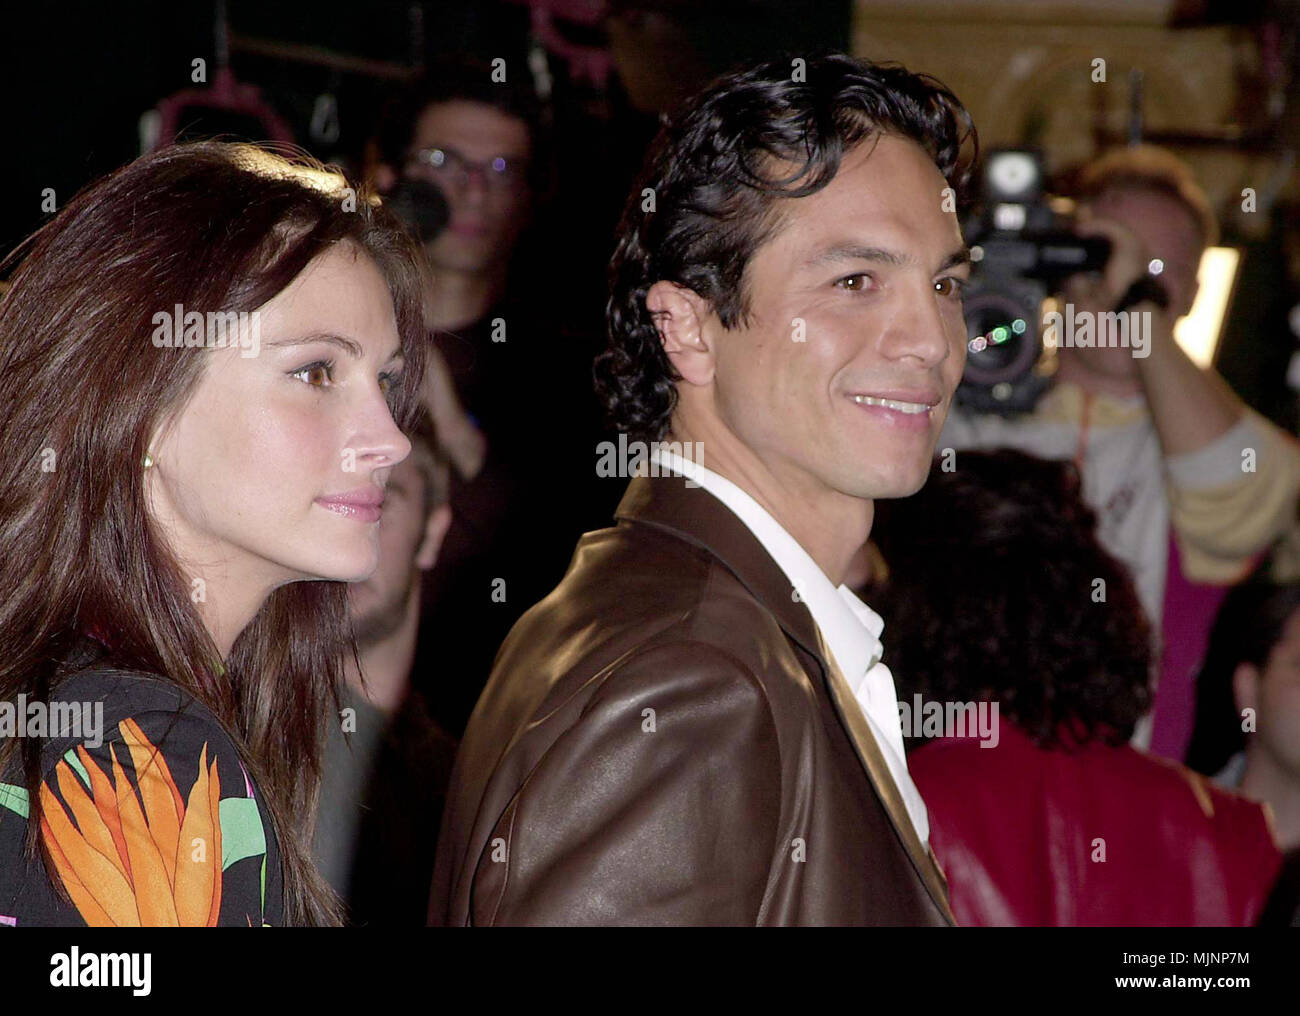 06 Nov 2000, Los Angeles, California, USA --- Original caption: Red Planet premiere was held at the Westwood Village Theatre in Los Angeles. --- ' Tsuni / Bourquard 'Julia Roberts and Benjamin Bratt      Julia Roberts and Benjamin Bratt      Julia Roberts and Benjamin Bratt      Event in Hollywood Life - California,  Red Carpet Event, Vertical, USA, Film Industry, Celebrities,  Photography, Bestof, Arts Culture and Entertainment, Topix  Celebrities fashion /  from the Red Carpet-1994-2000, one person, Vertical, Best of, Hollywood Life, Event in Hollywood Life - California,  Red Carpet and back Stock Photo